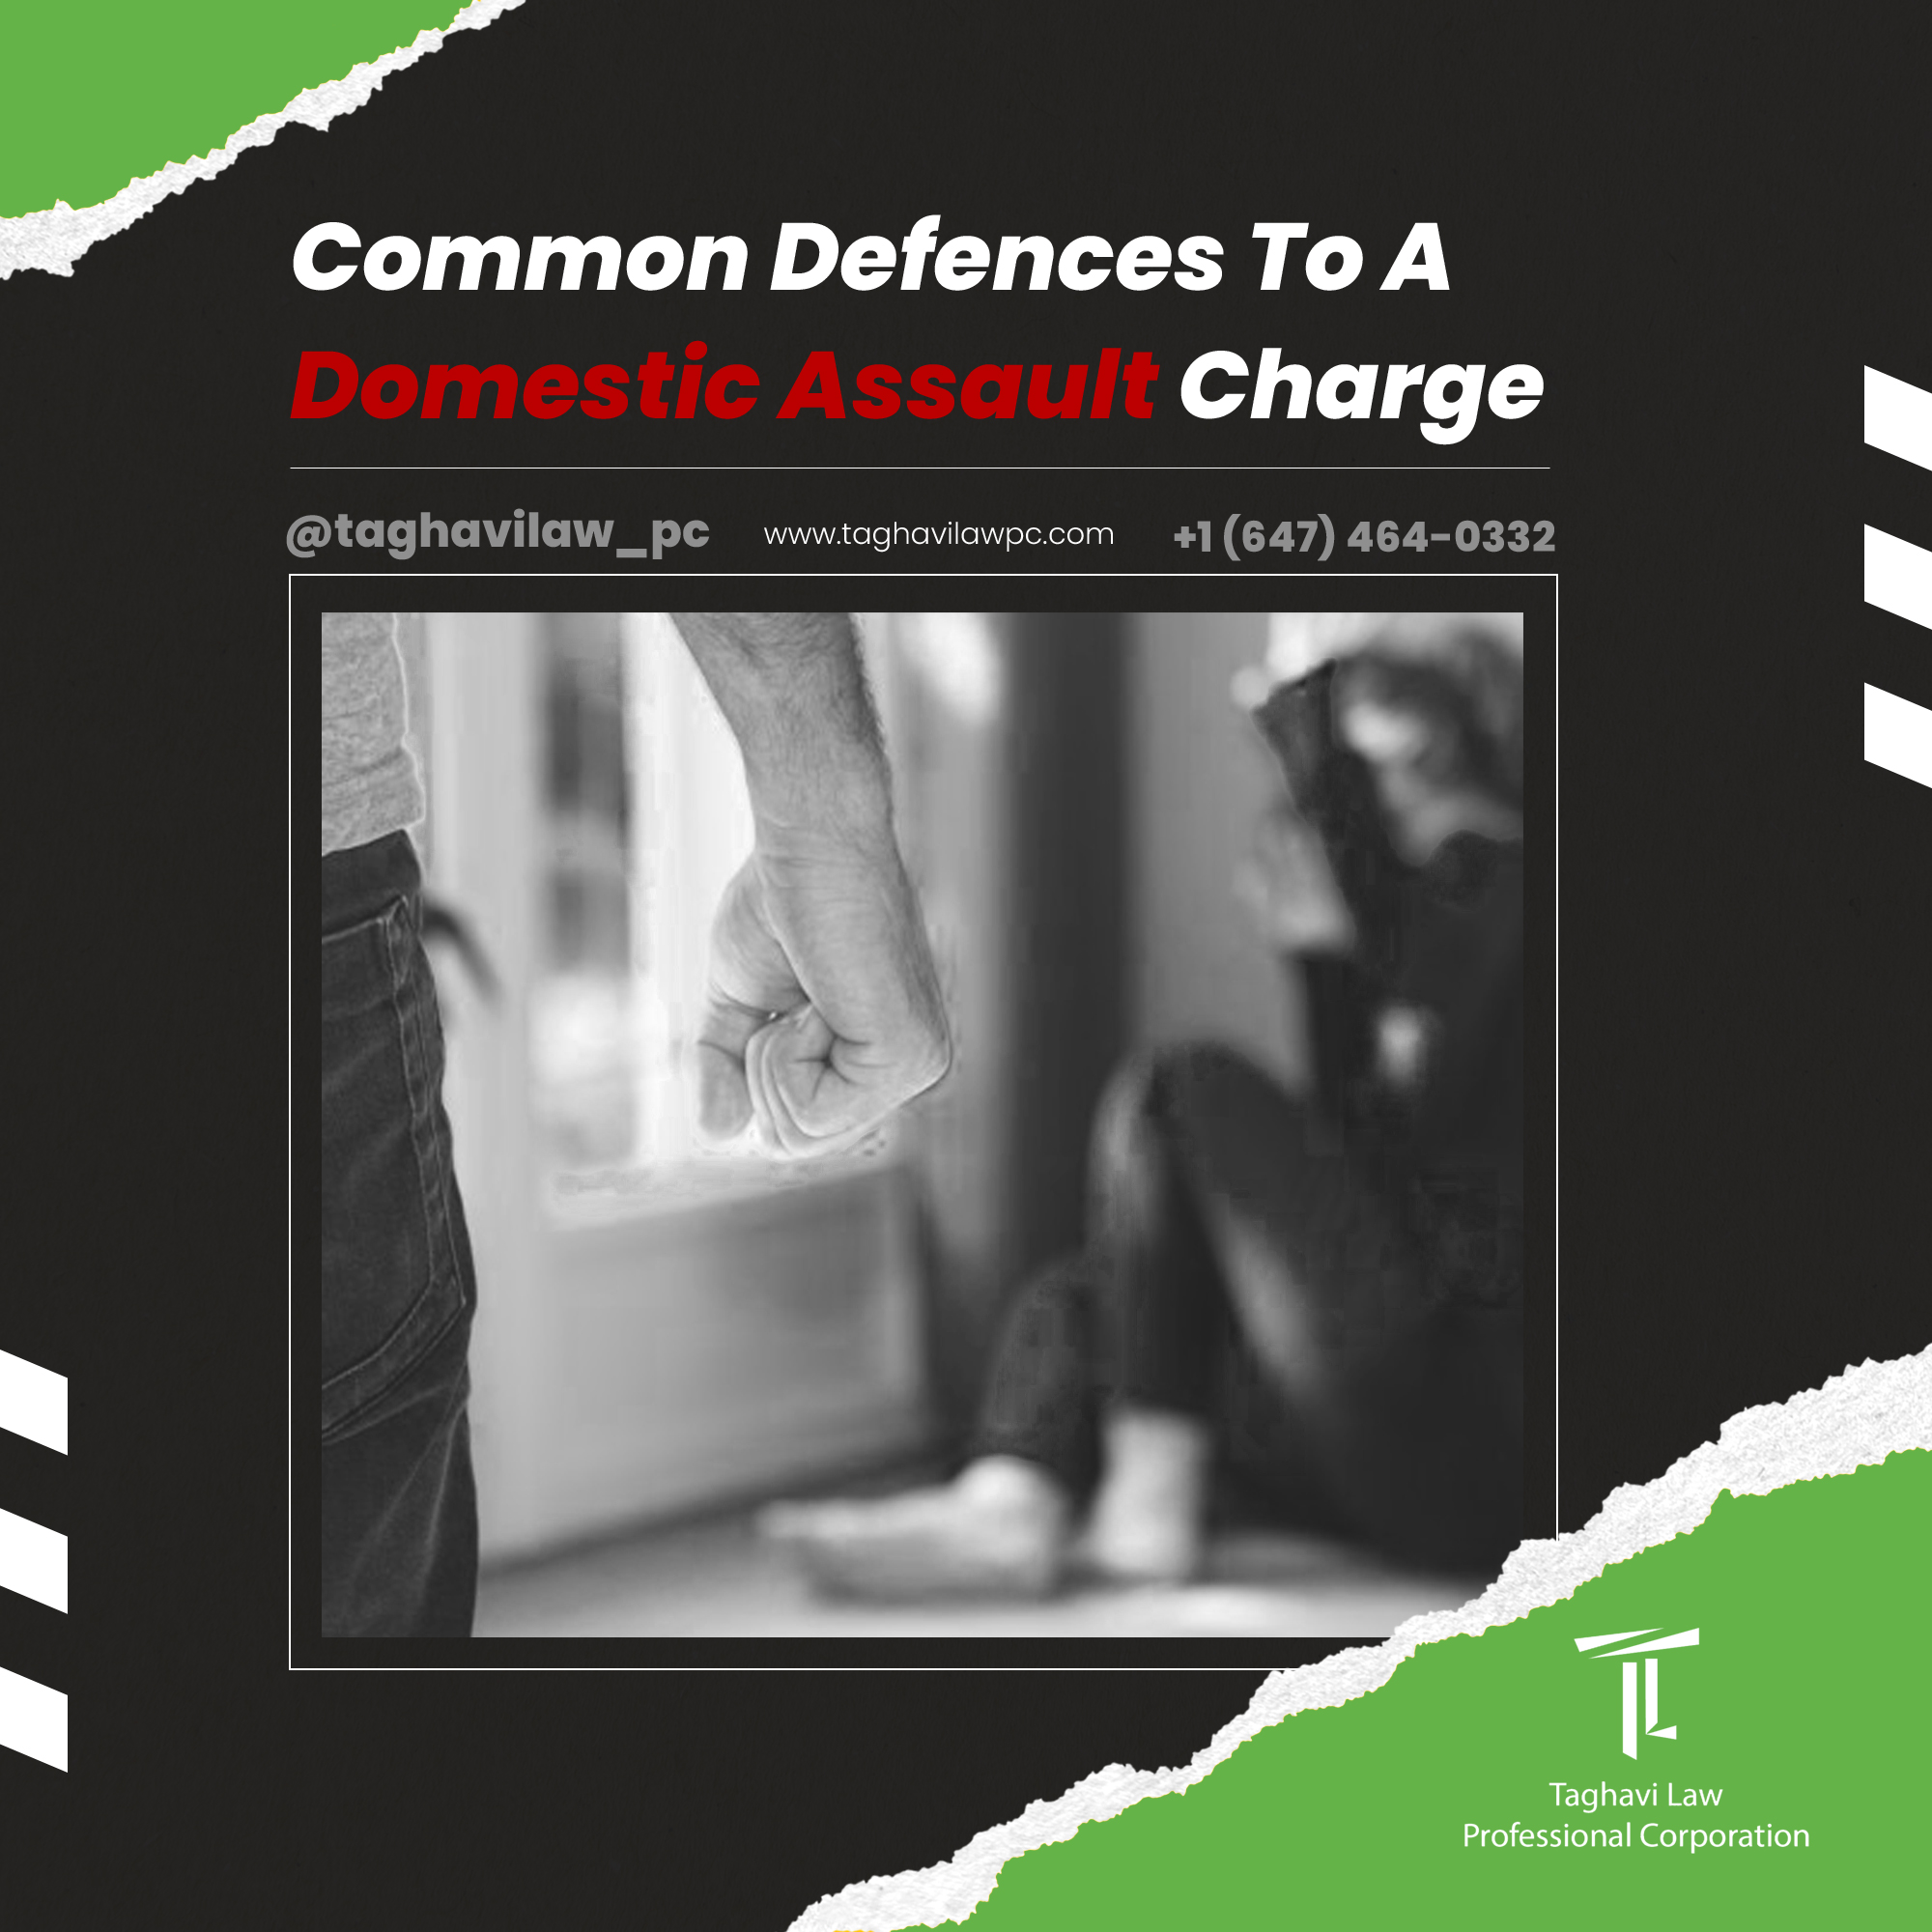 Common Defenses To A Domestic Assault Charge